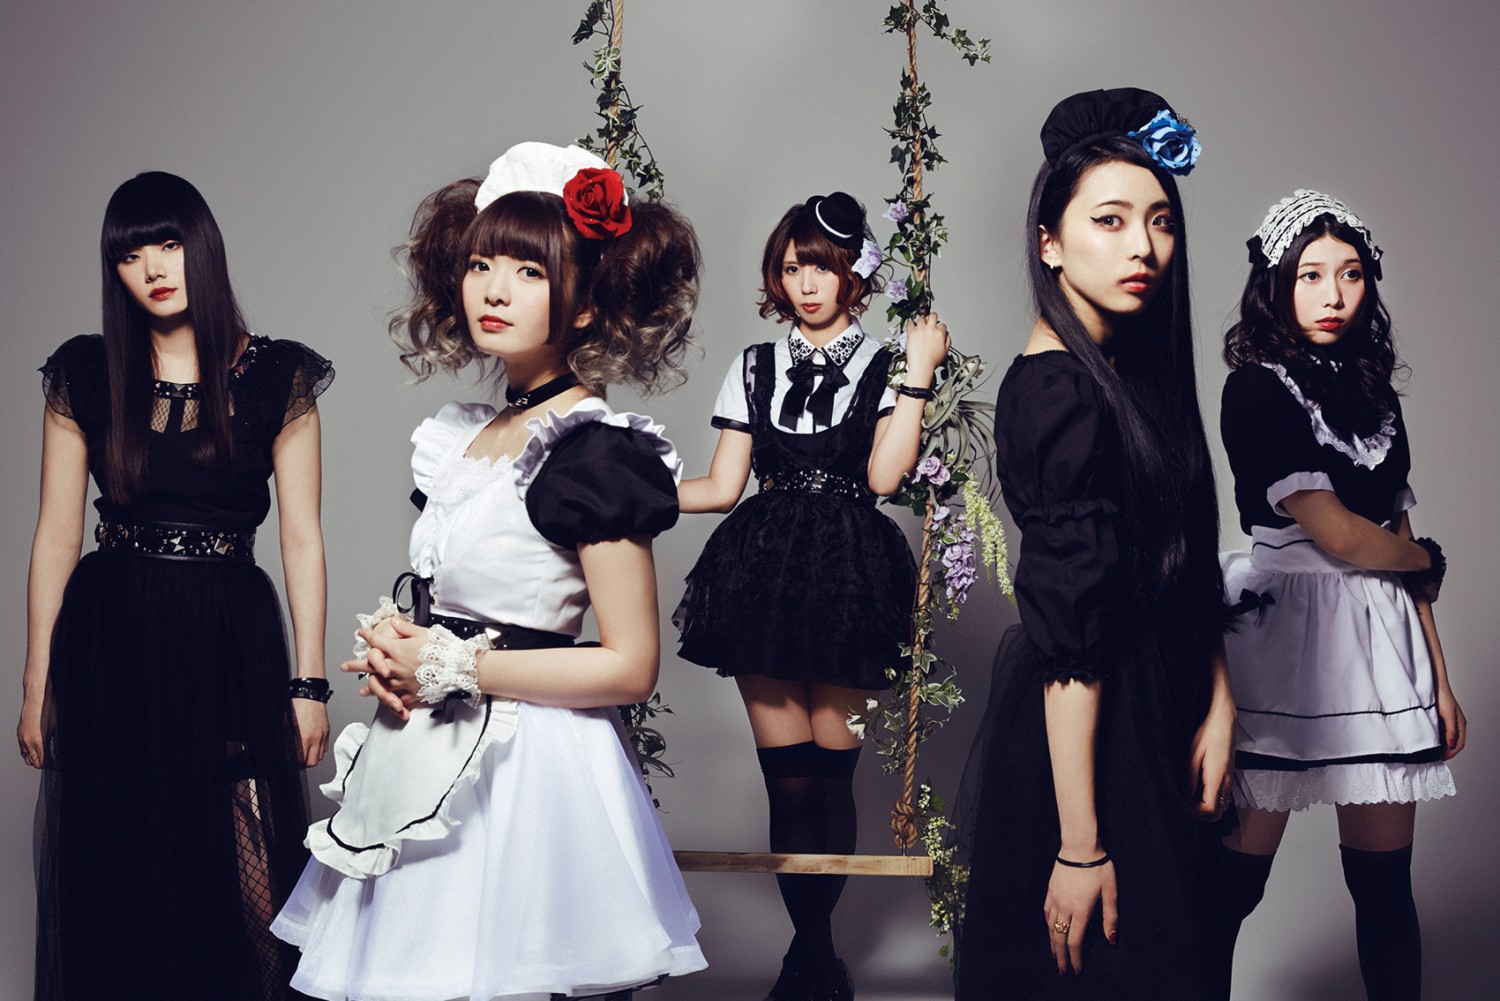 File Under “Highly Flammable”: BAND-MAID Feel the Burn in the MV for “the non-fiction days”!